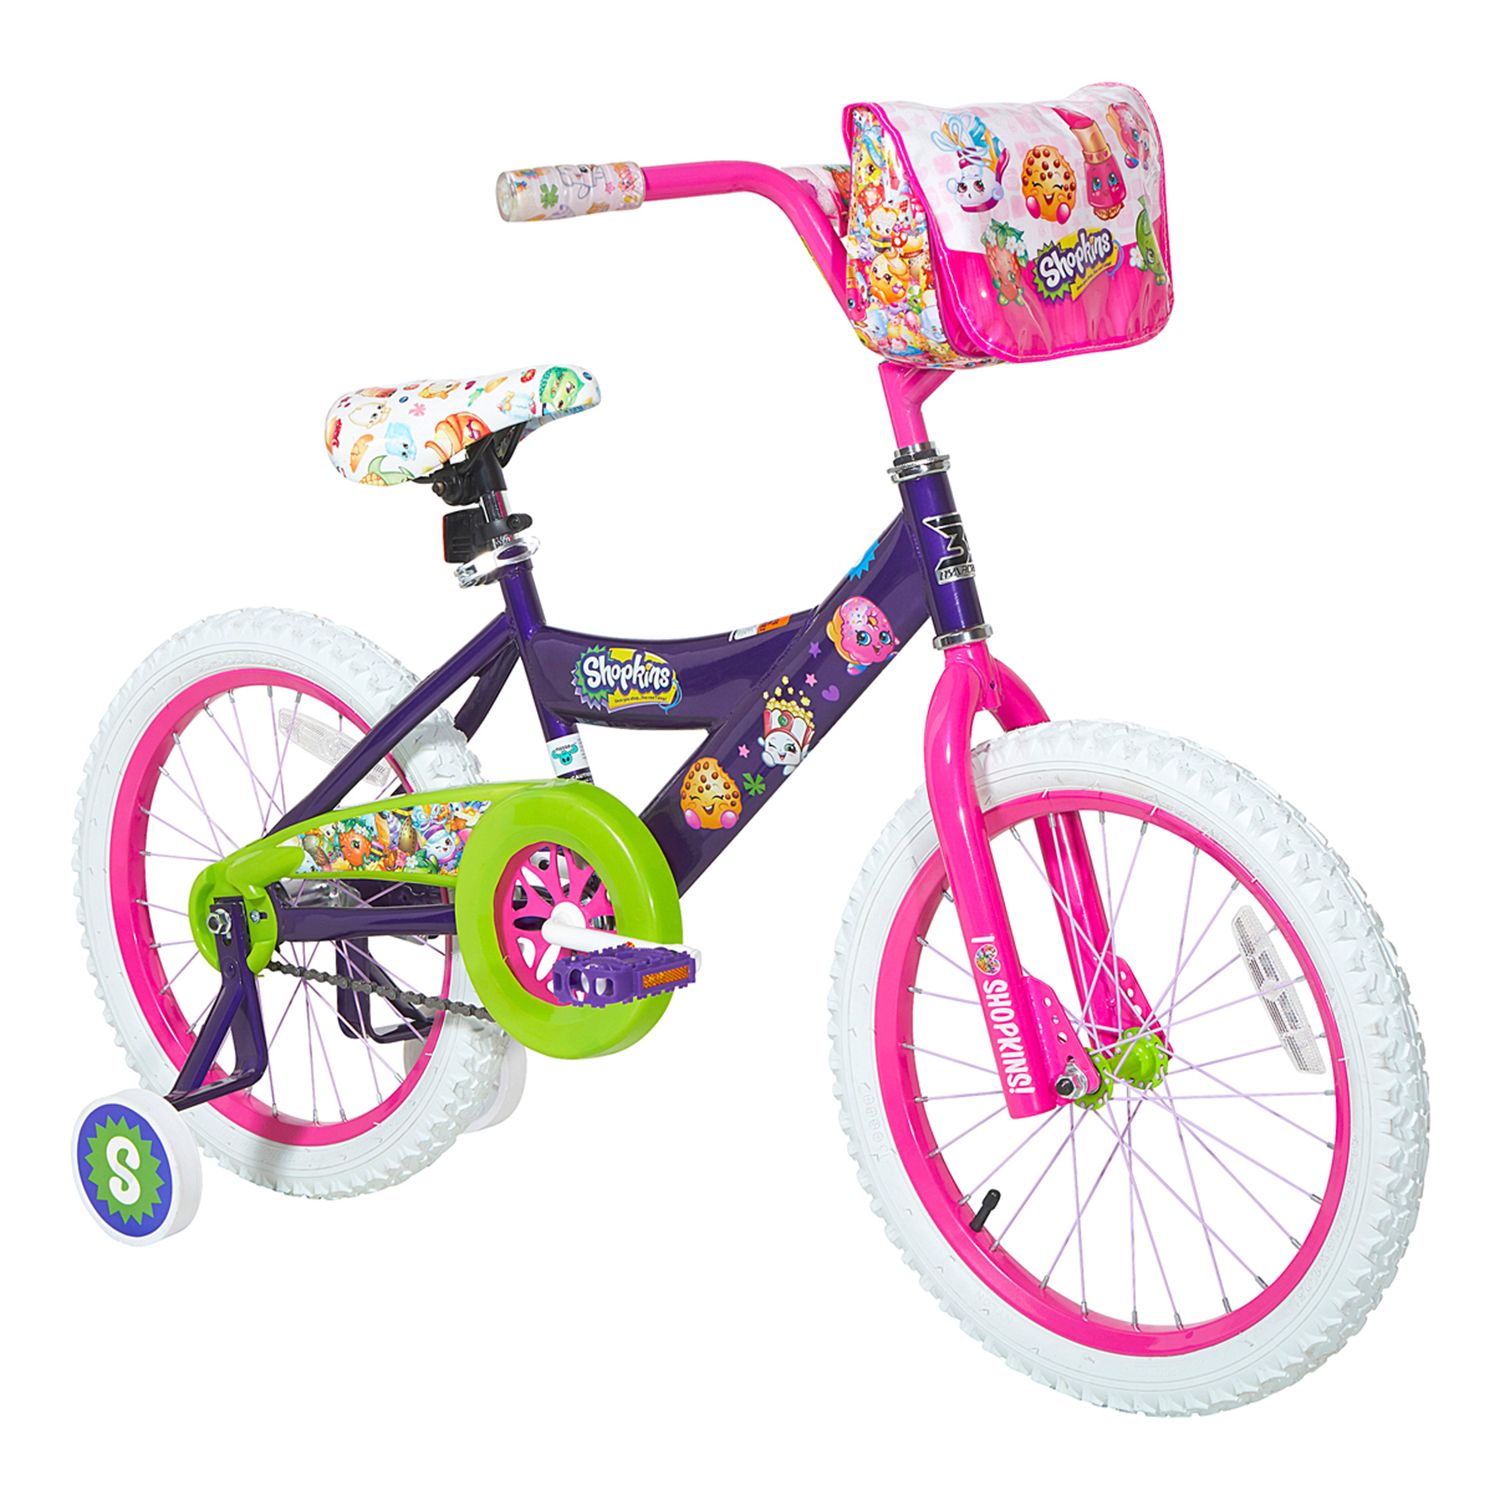 18 inch bicycle with training wheels